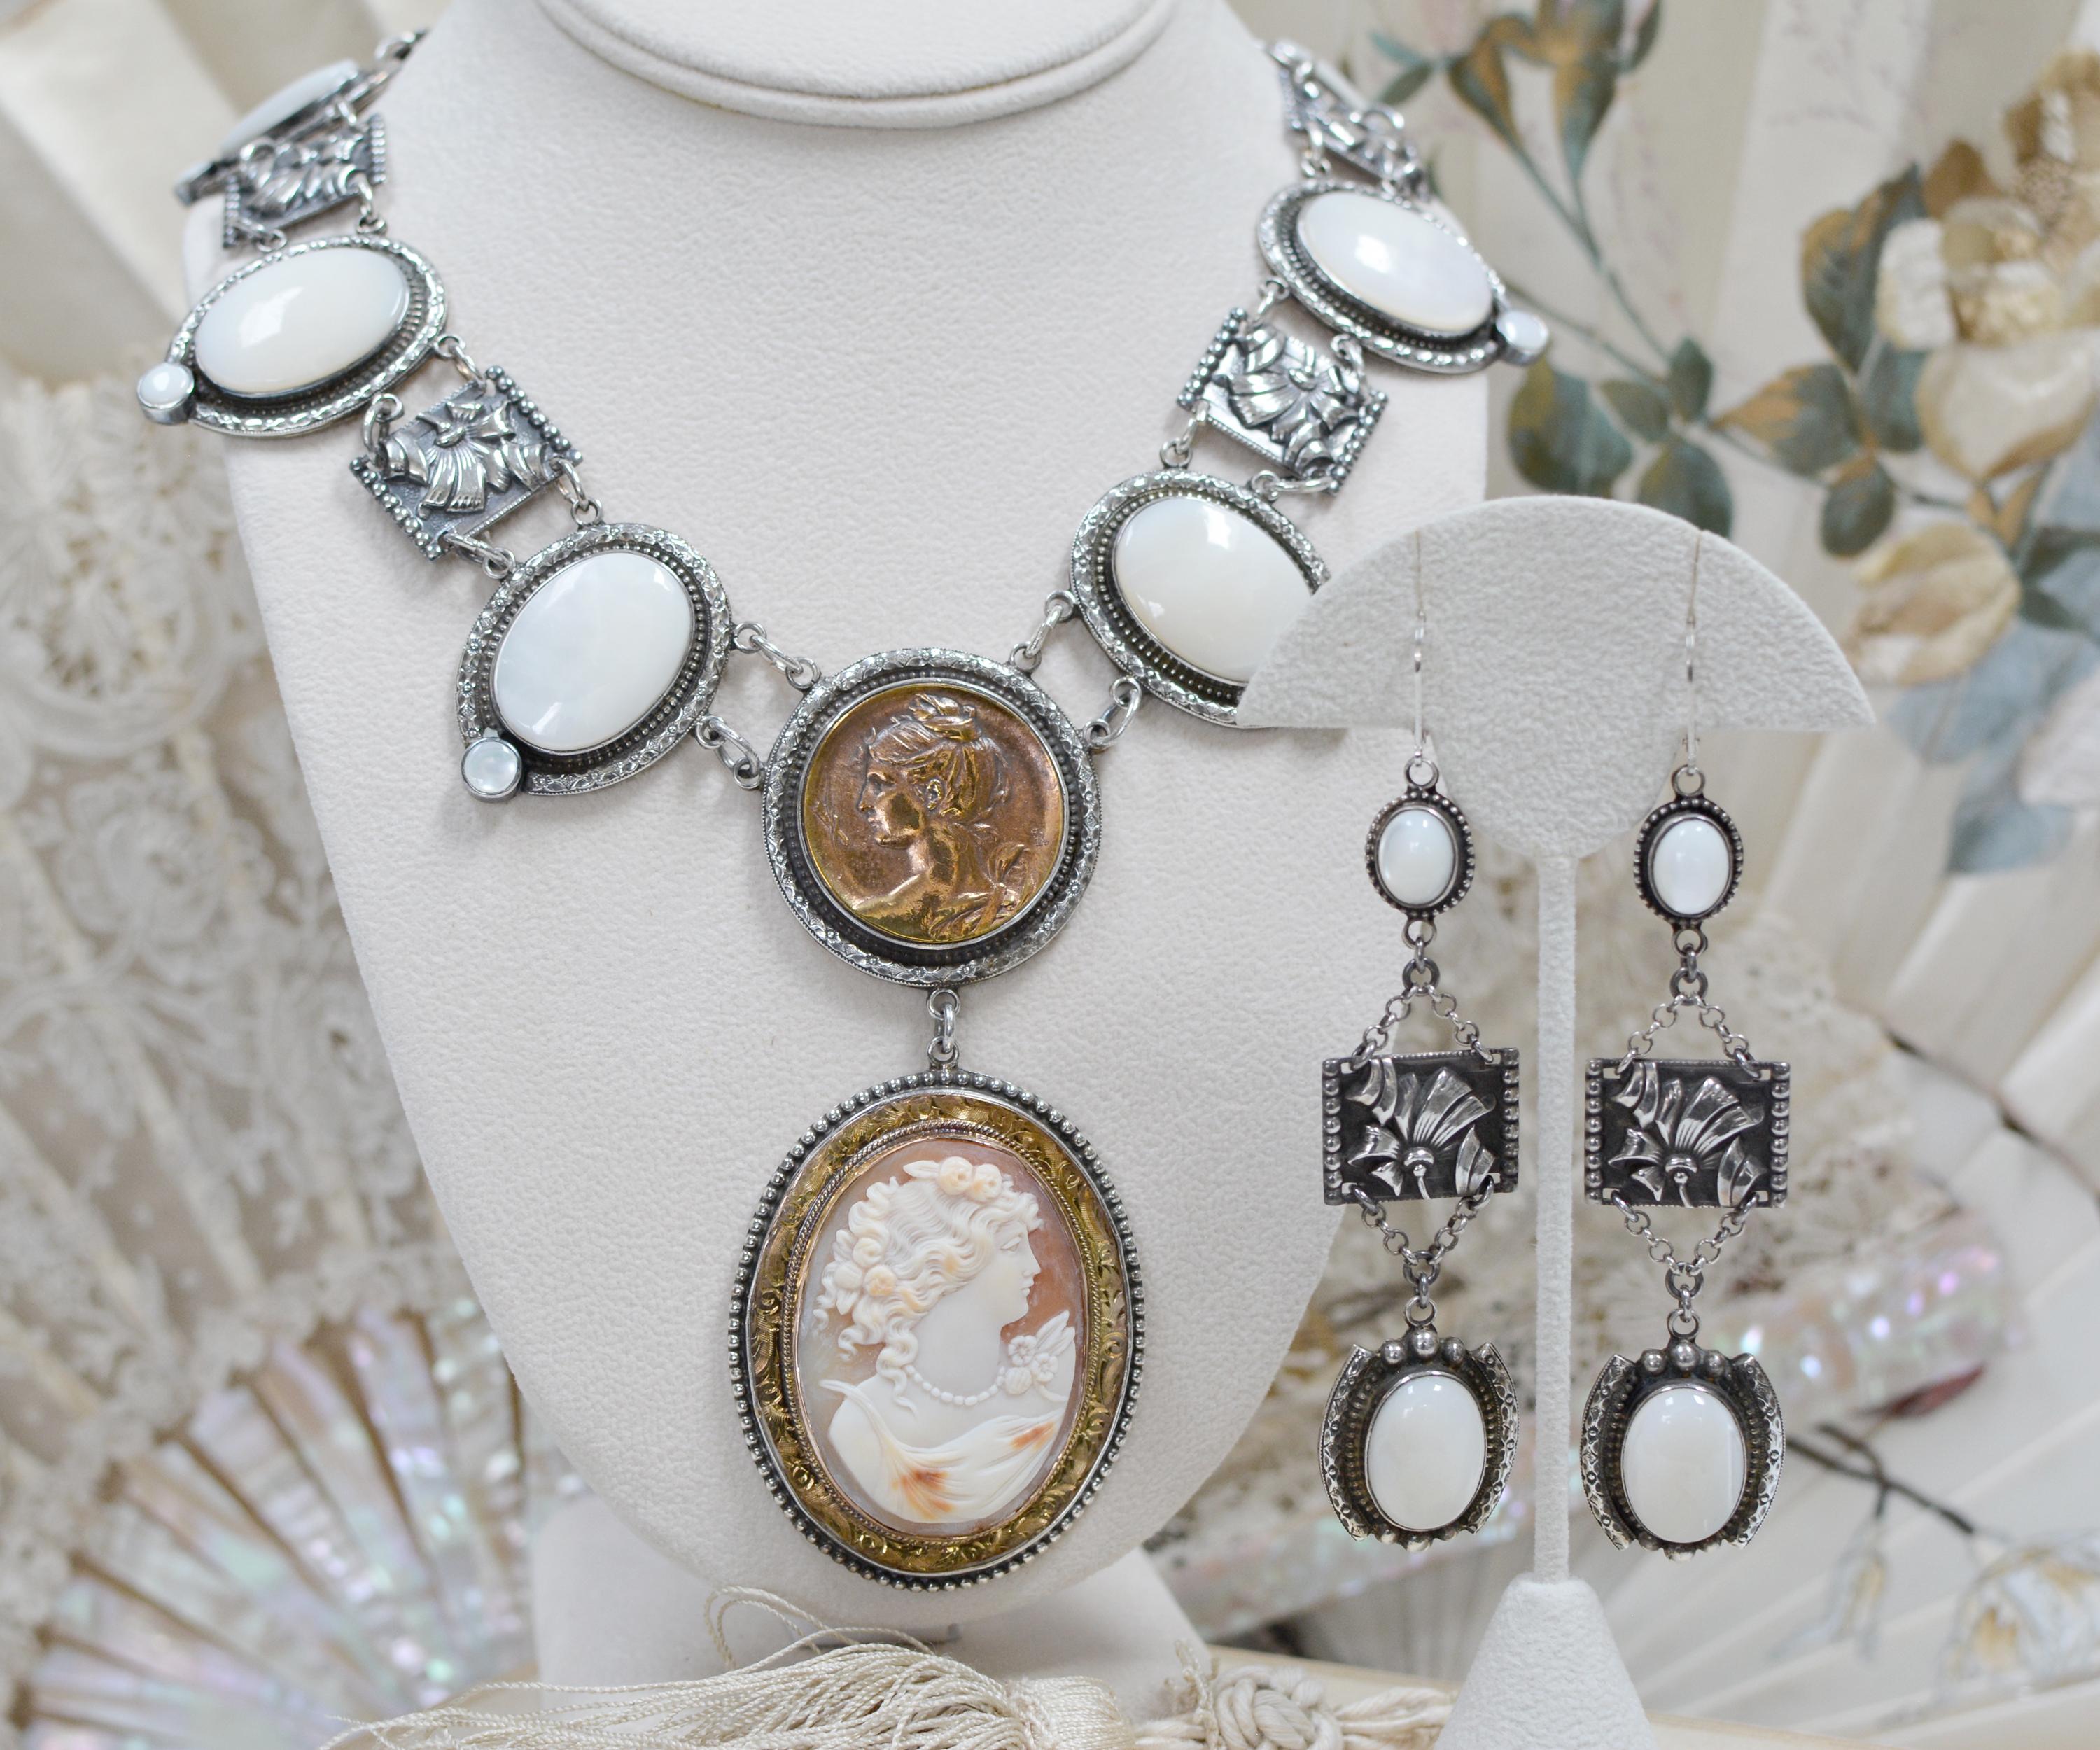 Jill Garber Nineteenth Century Goddess Cameo with Mother-of-Pearl Drop Necklace In Excellent Condition For Sale In Saginaw, MI